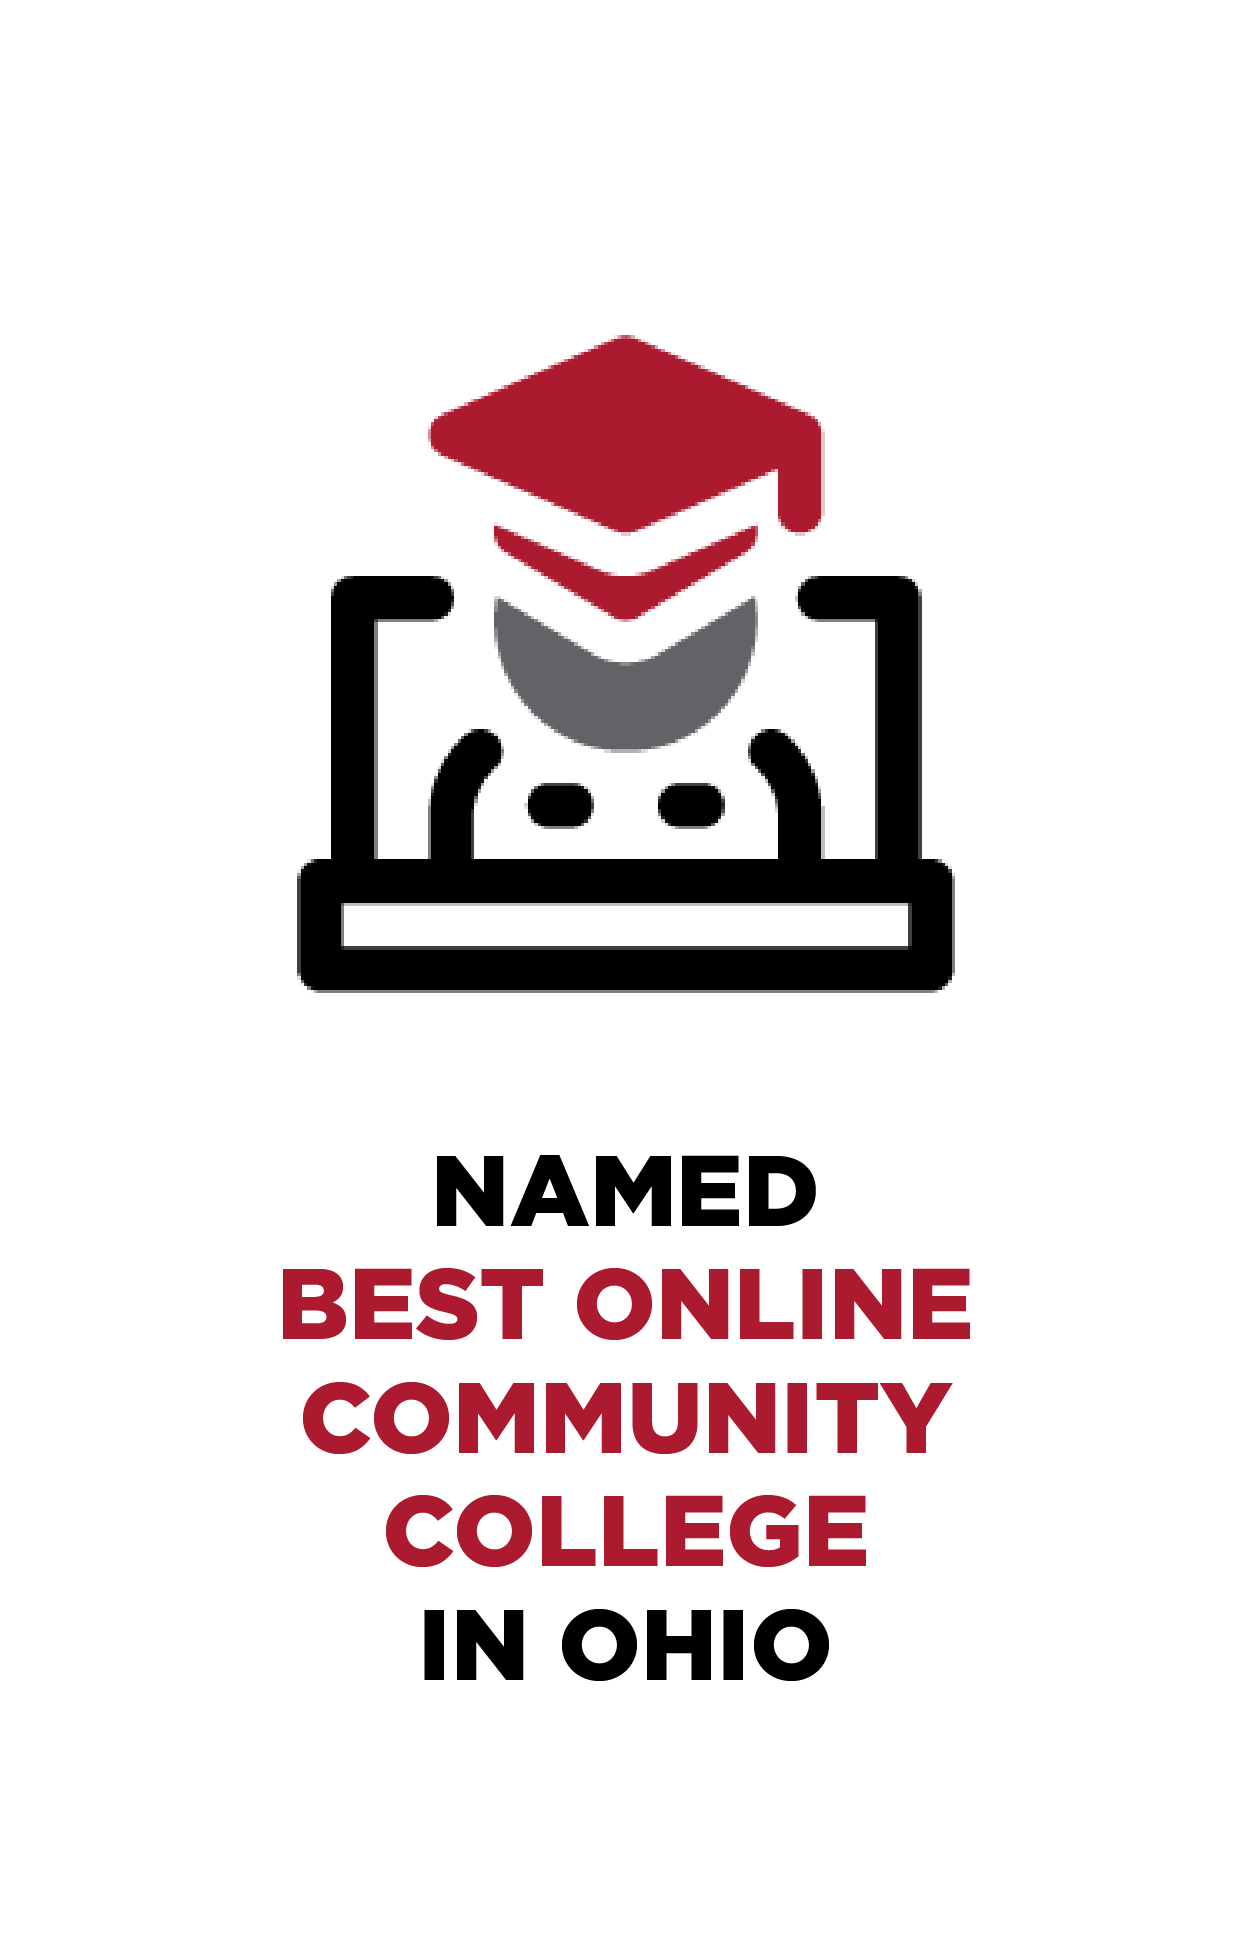 Named Best Online Community College in Ohio